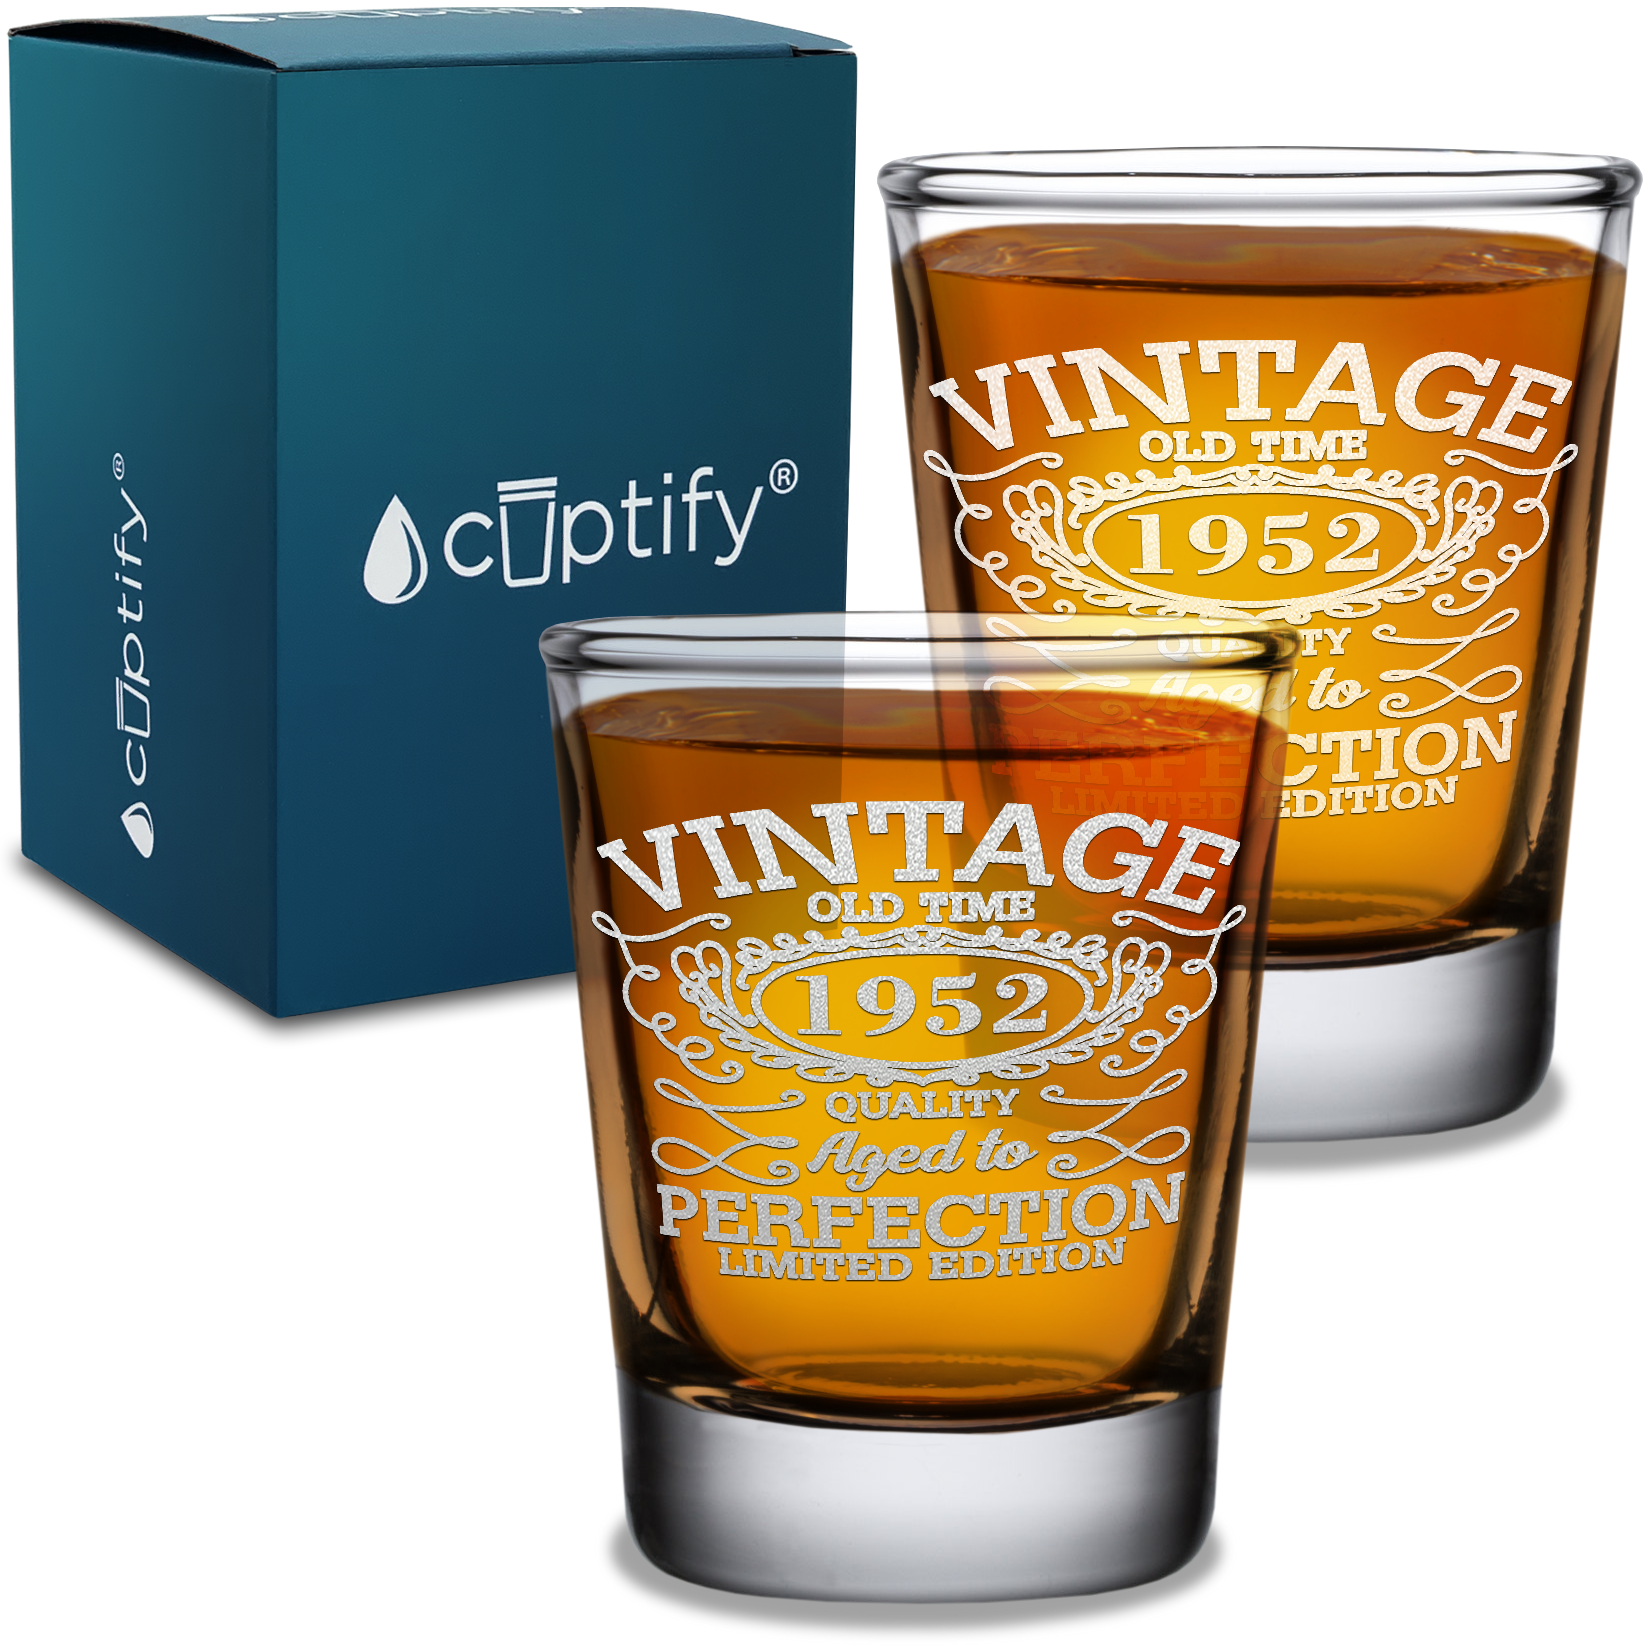 69th Birthday Vintage 69 Years Old Time 1952 Quality Laser Engraved 2oz Shot Glasses - Set of 2